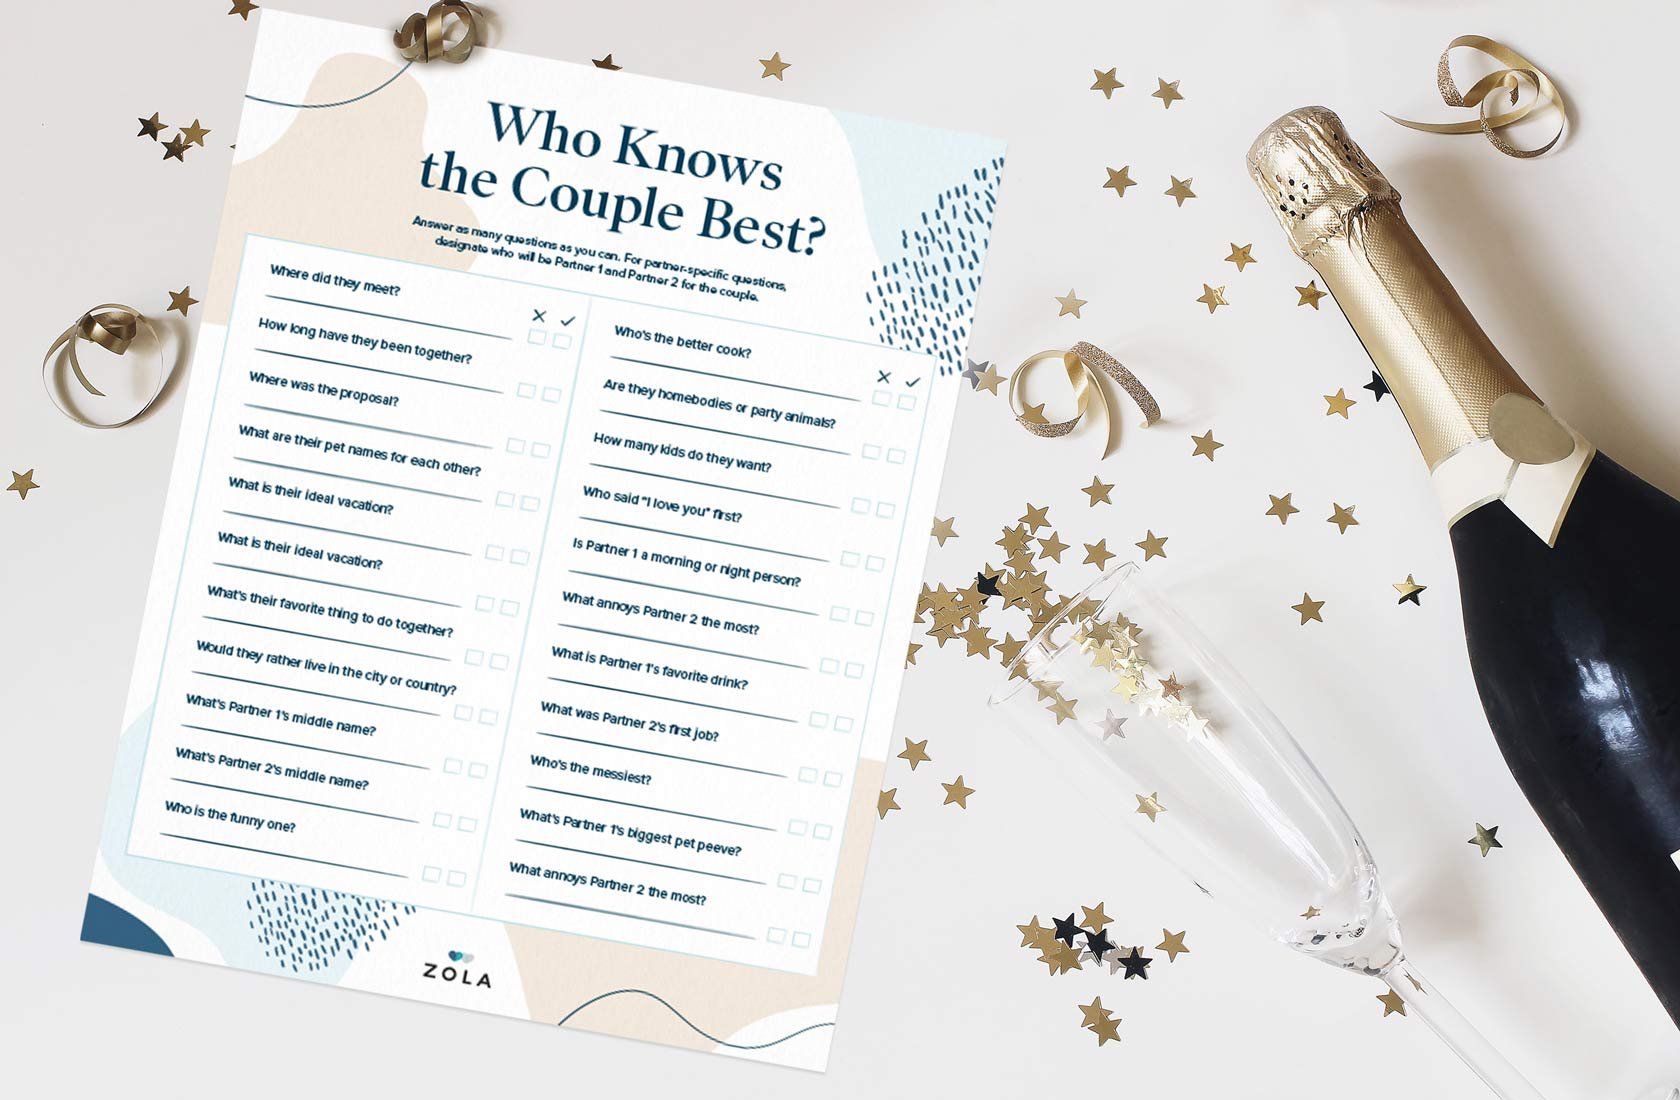 A piece of paper titled "who knows the couple best" sits on a white table with gold stars, confetti, and champagne.